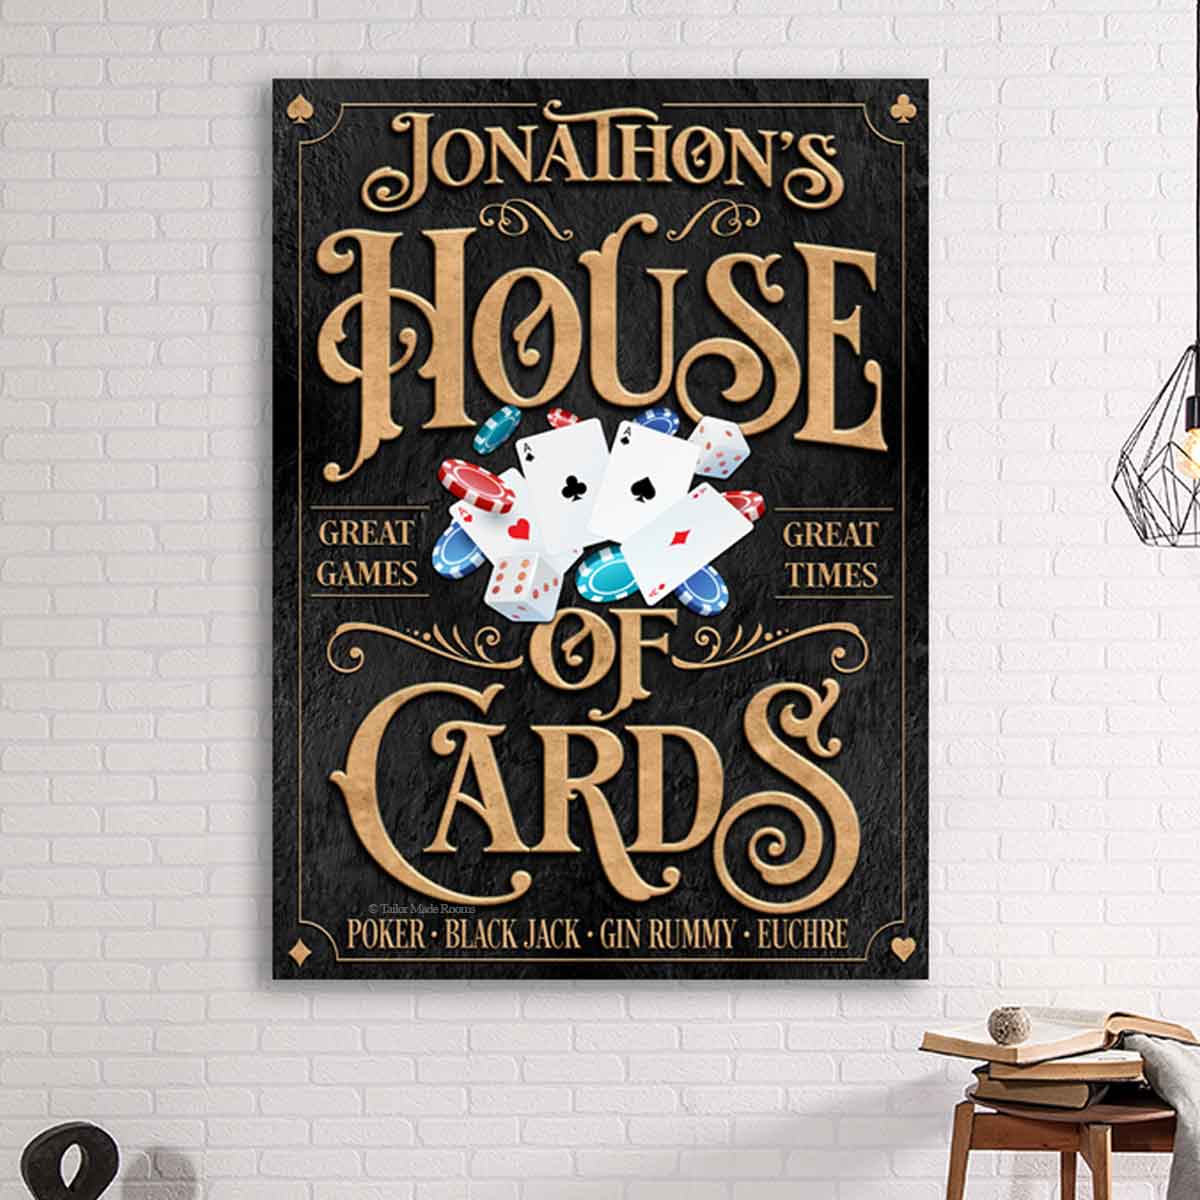 Poker room wall decor_playing card wall decor is set on a black stone backroud with wooden 3d lettering with the words: [family Name] House of Cards, poker black jack, gin rummy and euchre